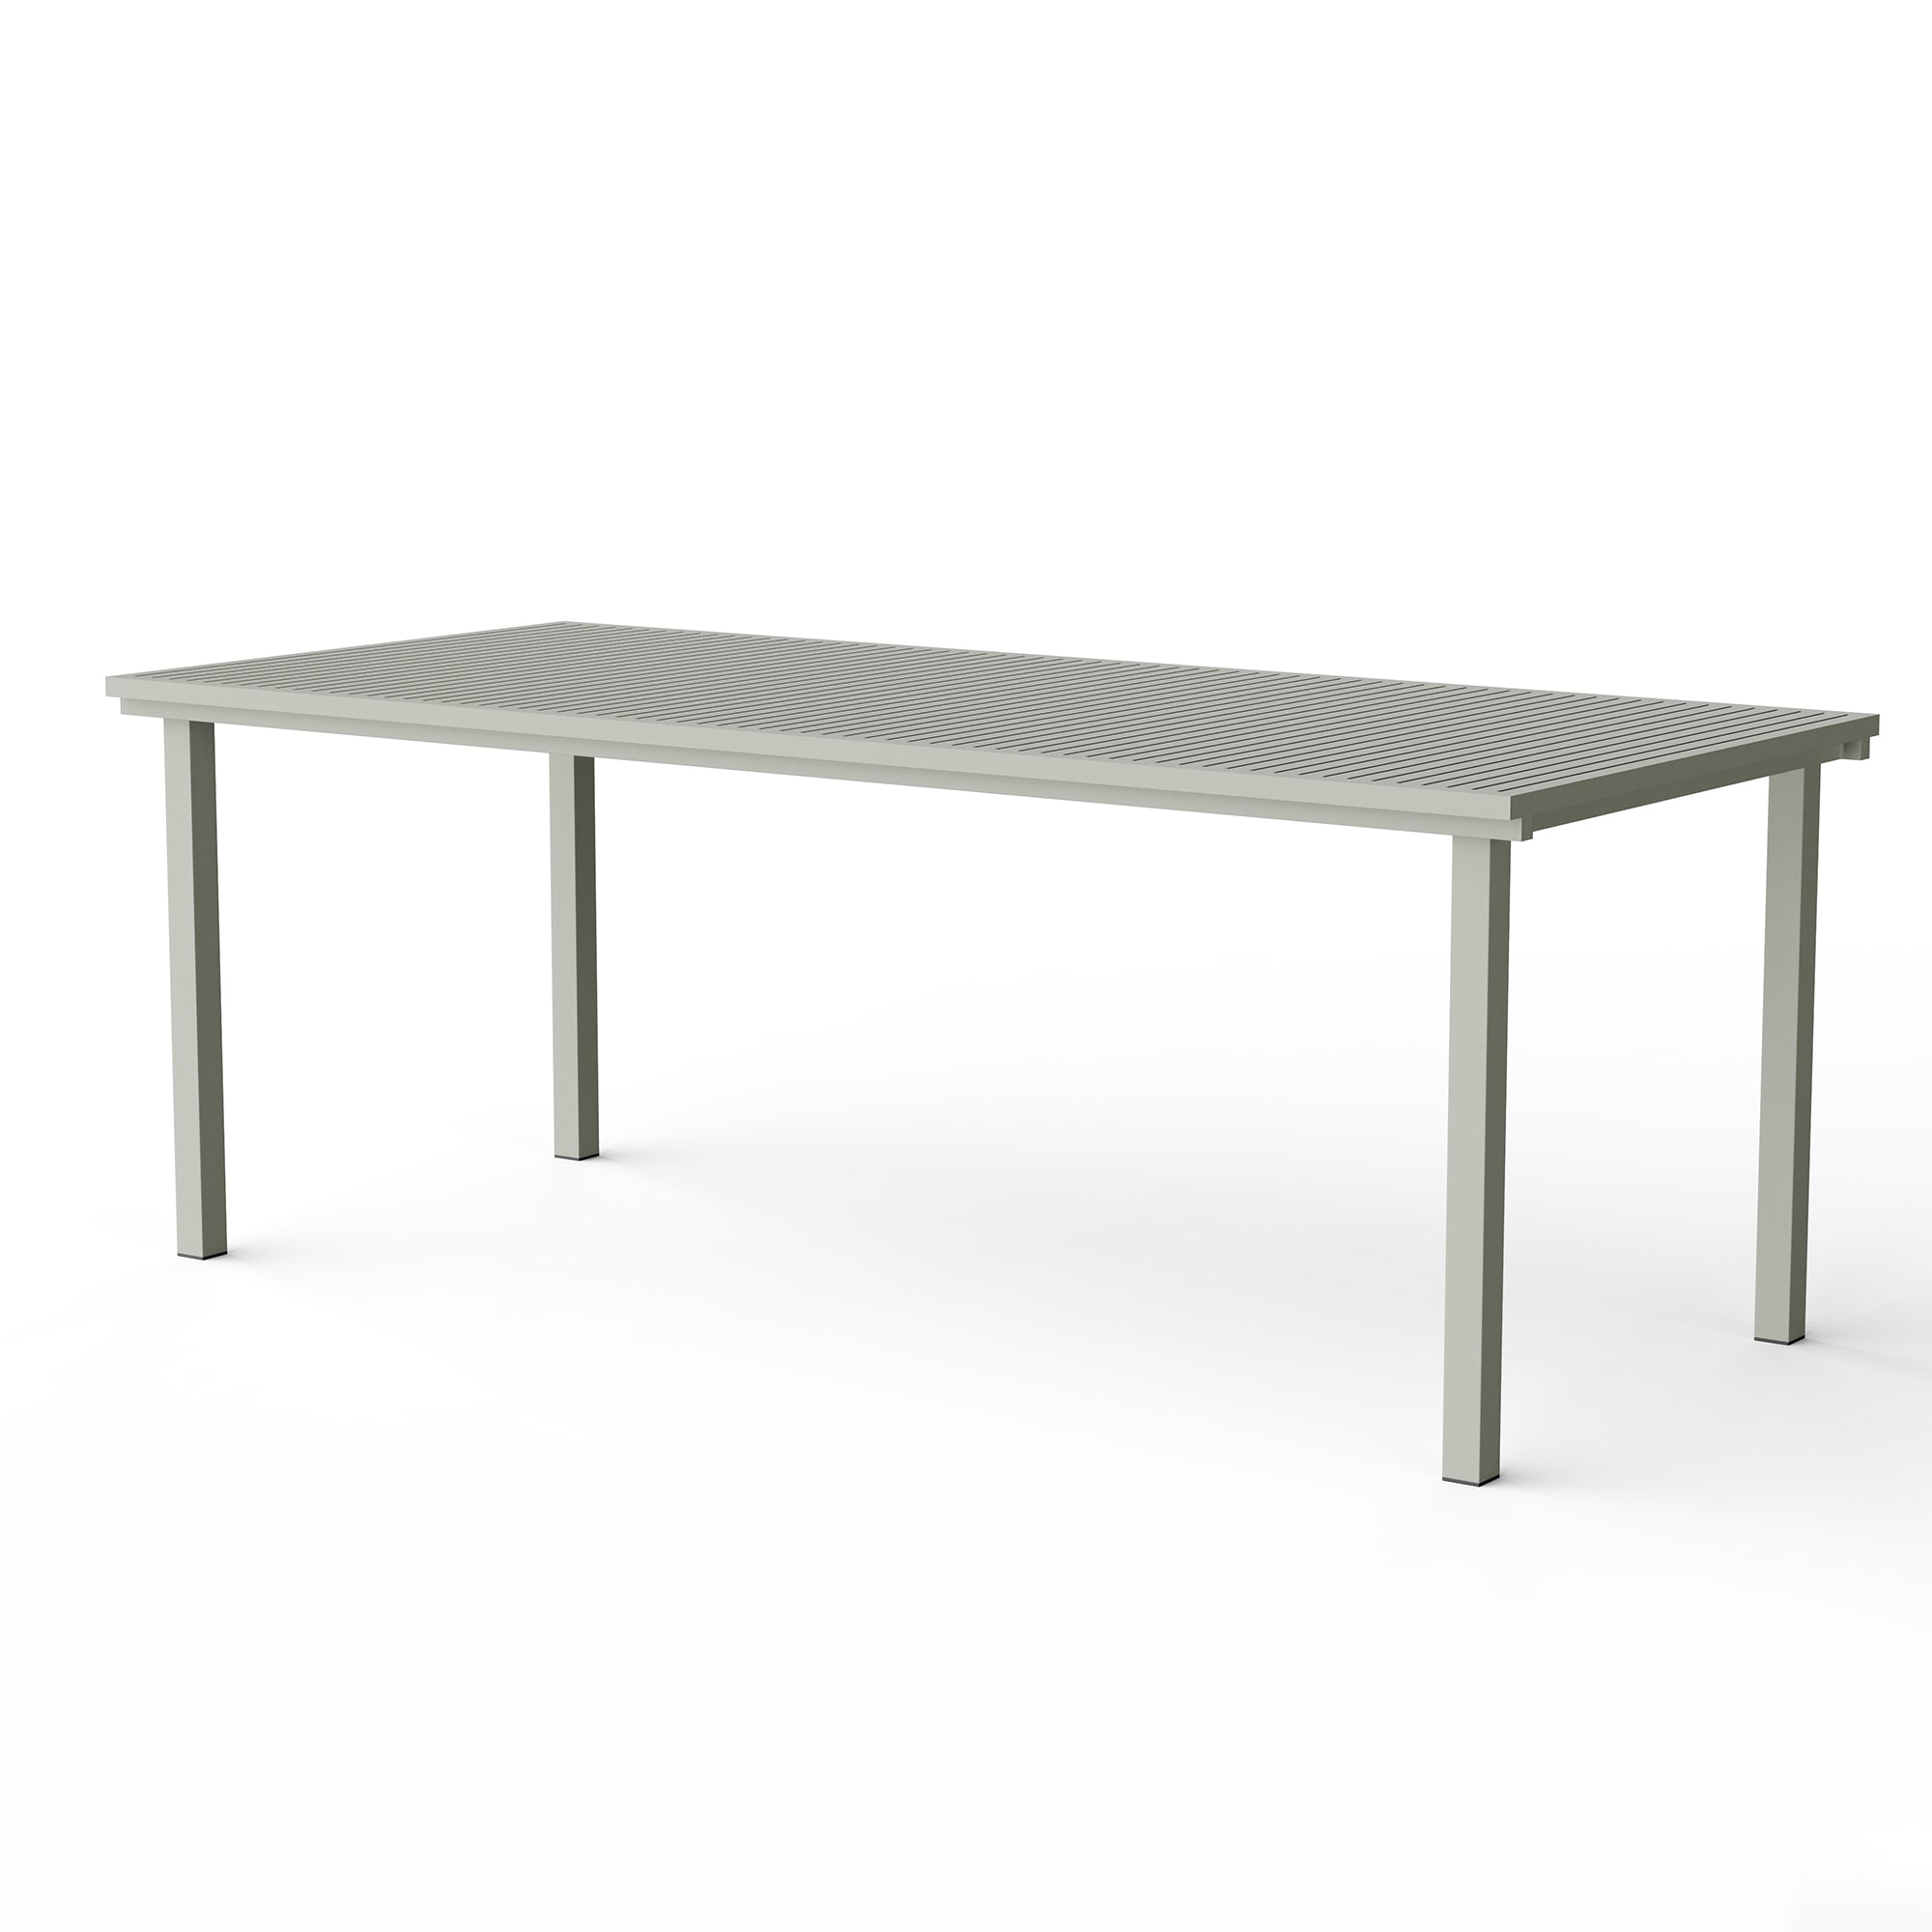 NINE 19 Outdoors Dining Table - Large